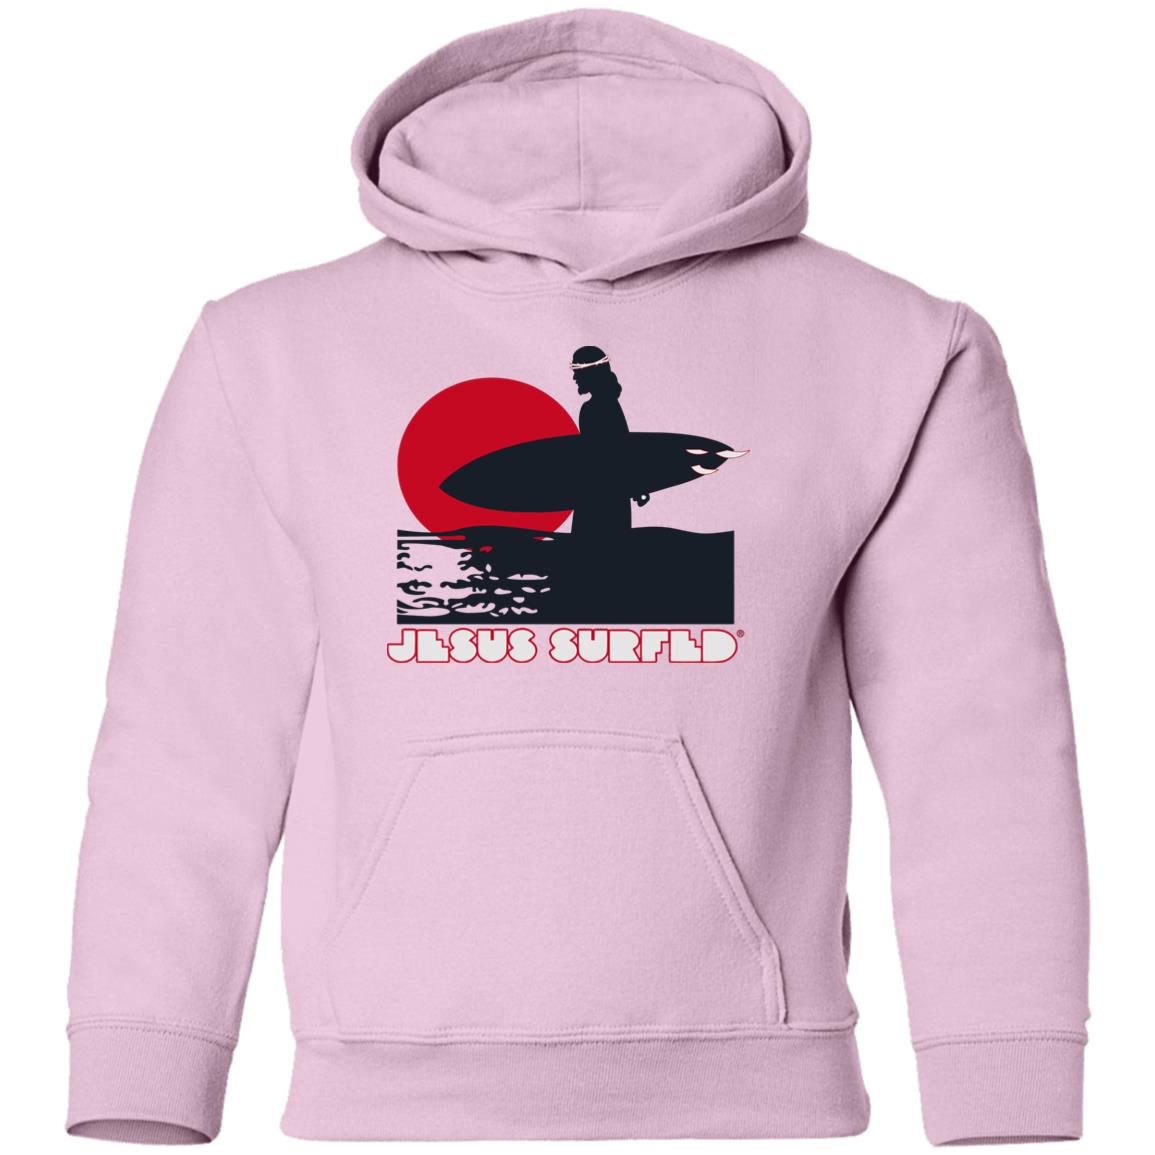 Sunset Boy's/Girl's Youth Cotton Hoodie